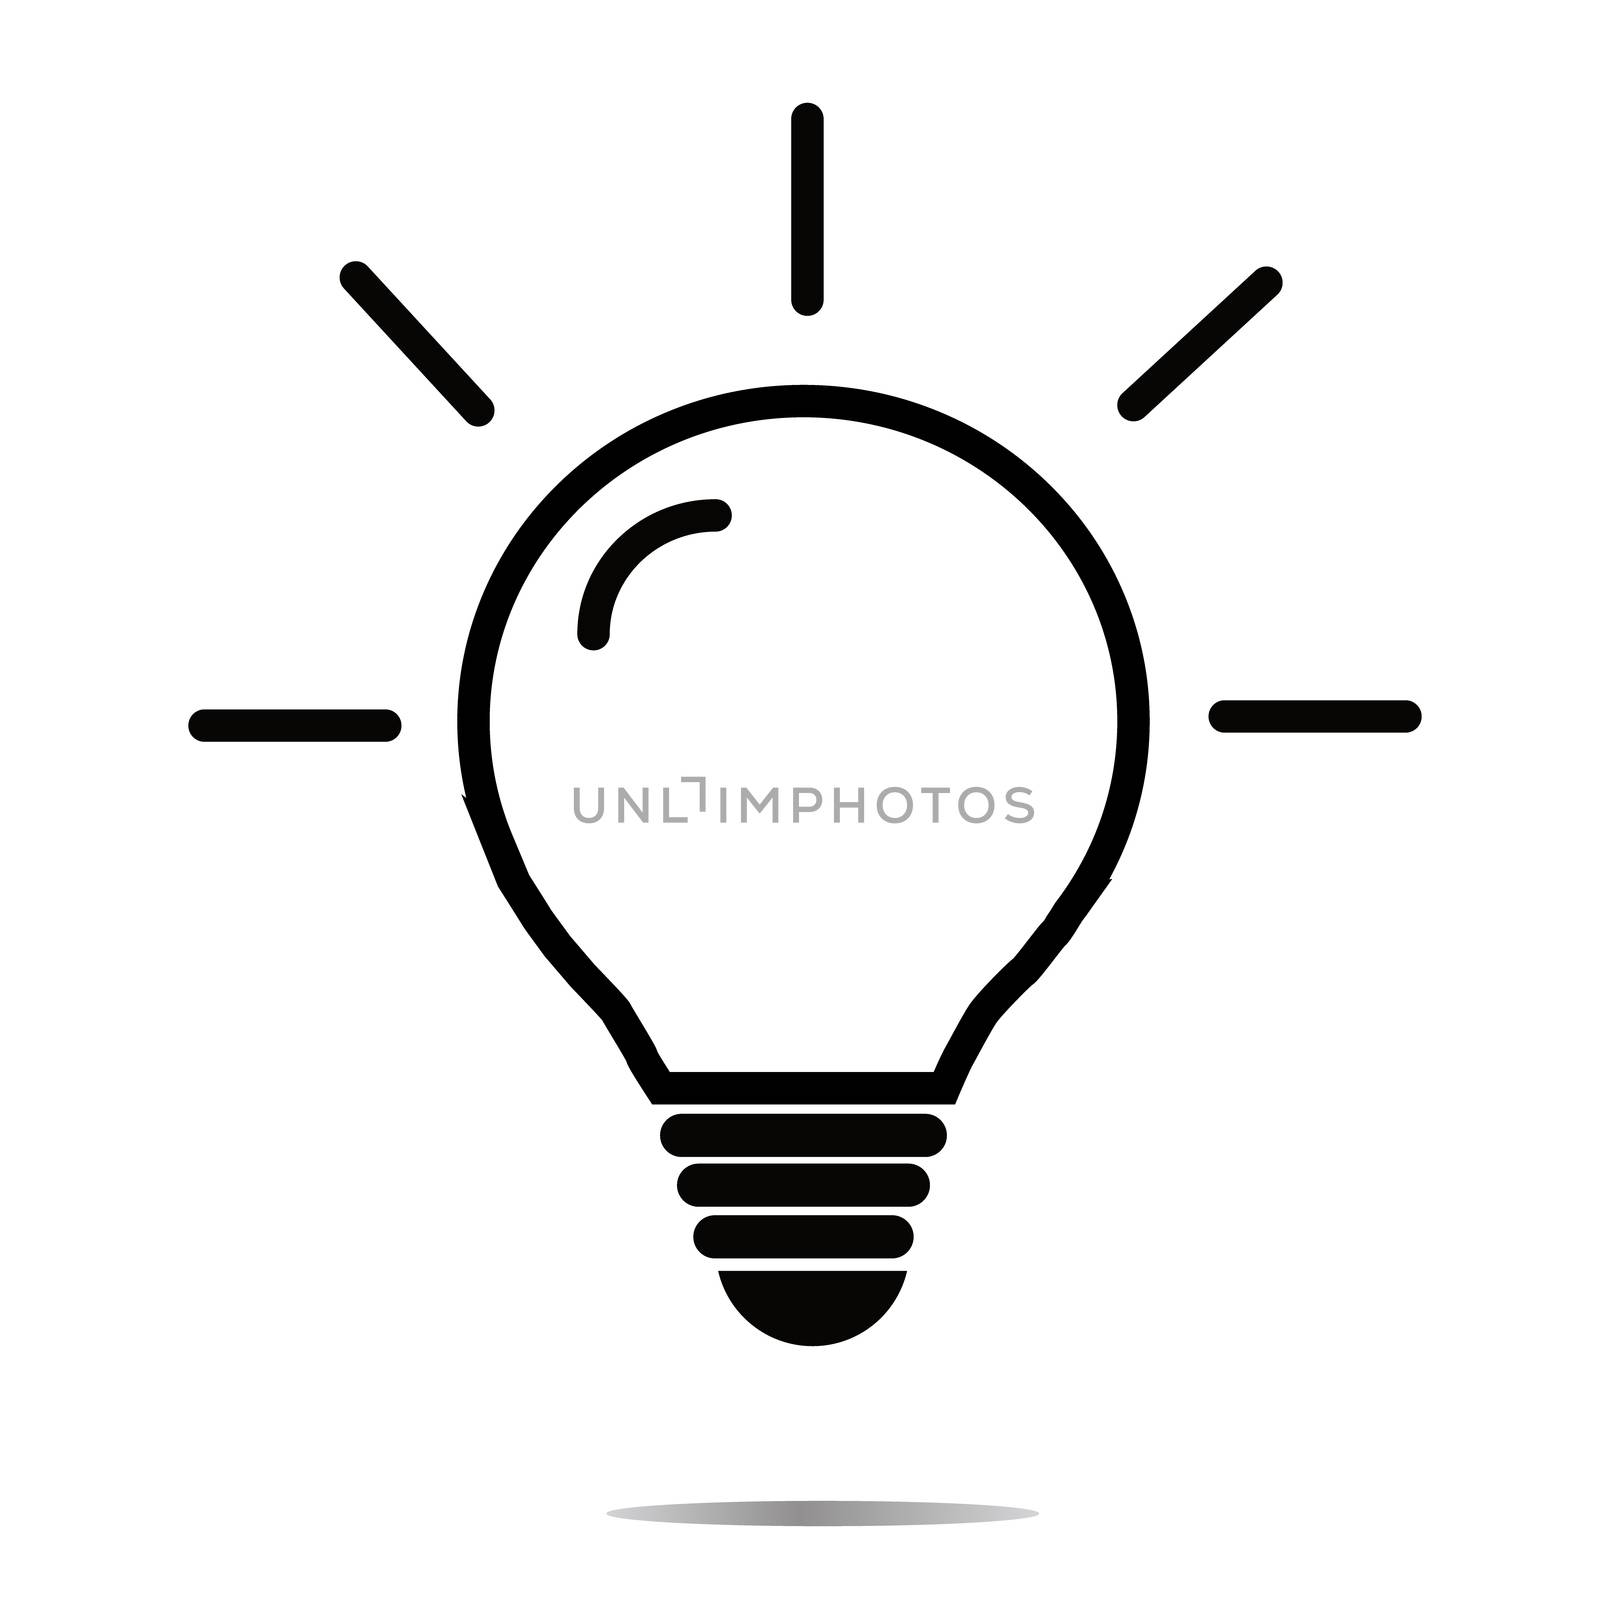 Creative idea in bulb shape as inspiration concept. light Icon on white background. idea symbol. flat style. light icon for your web site design, logo, app, UI.